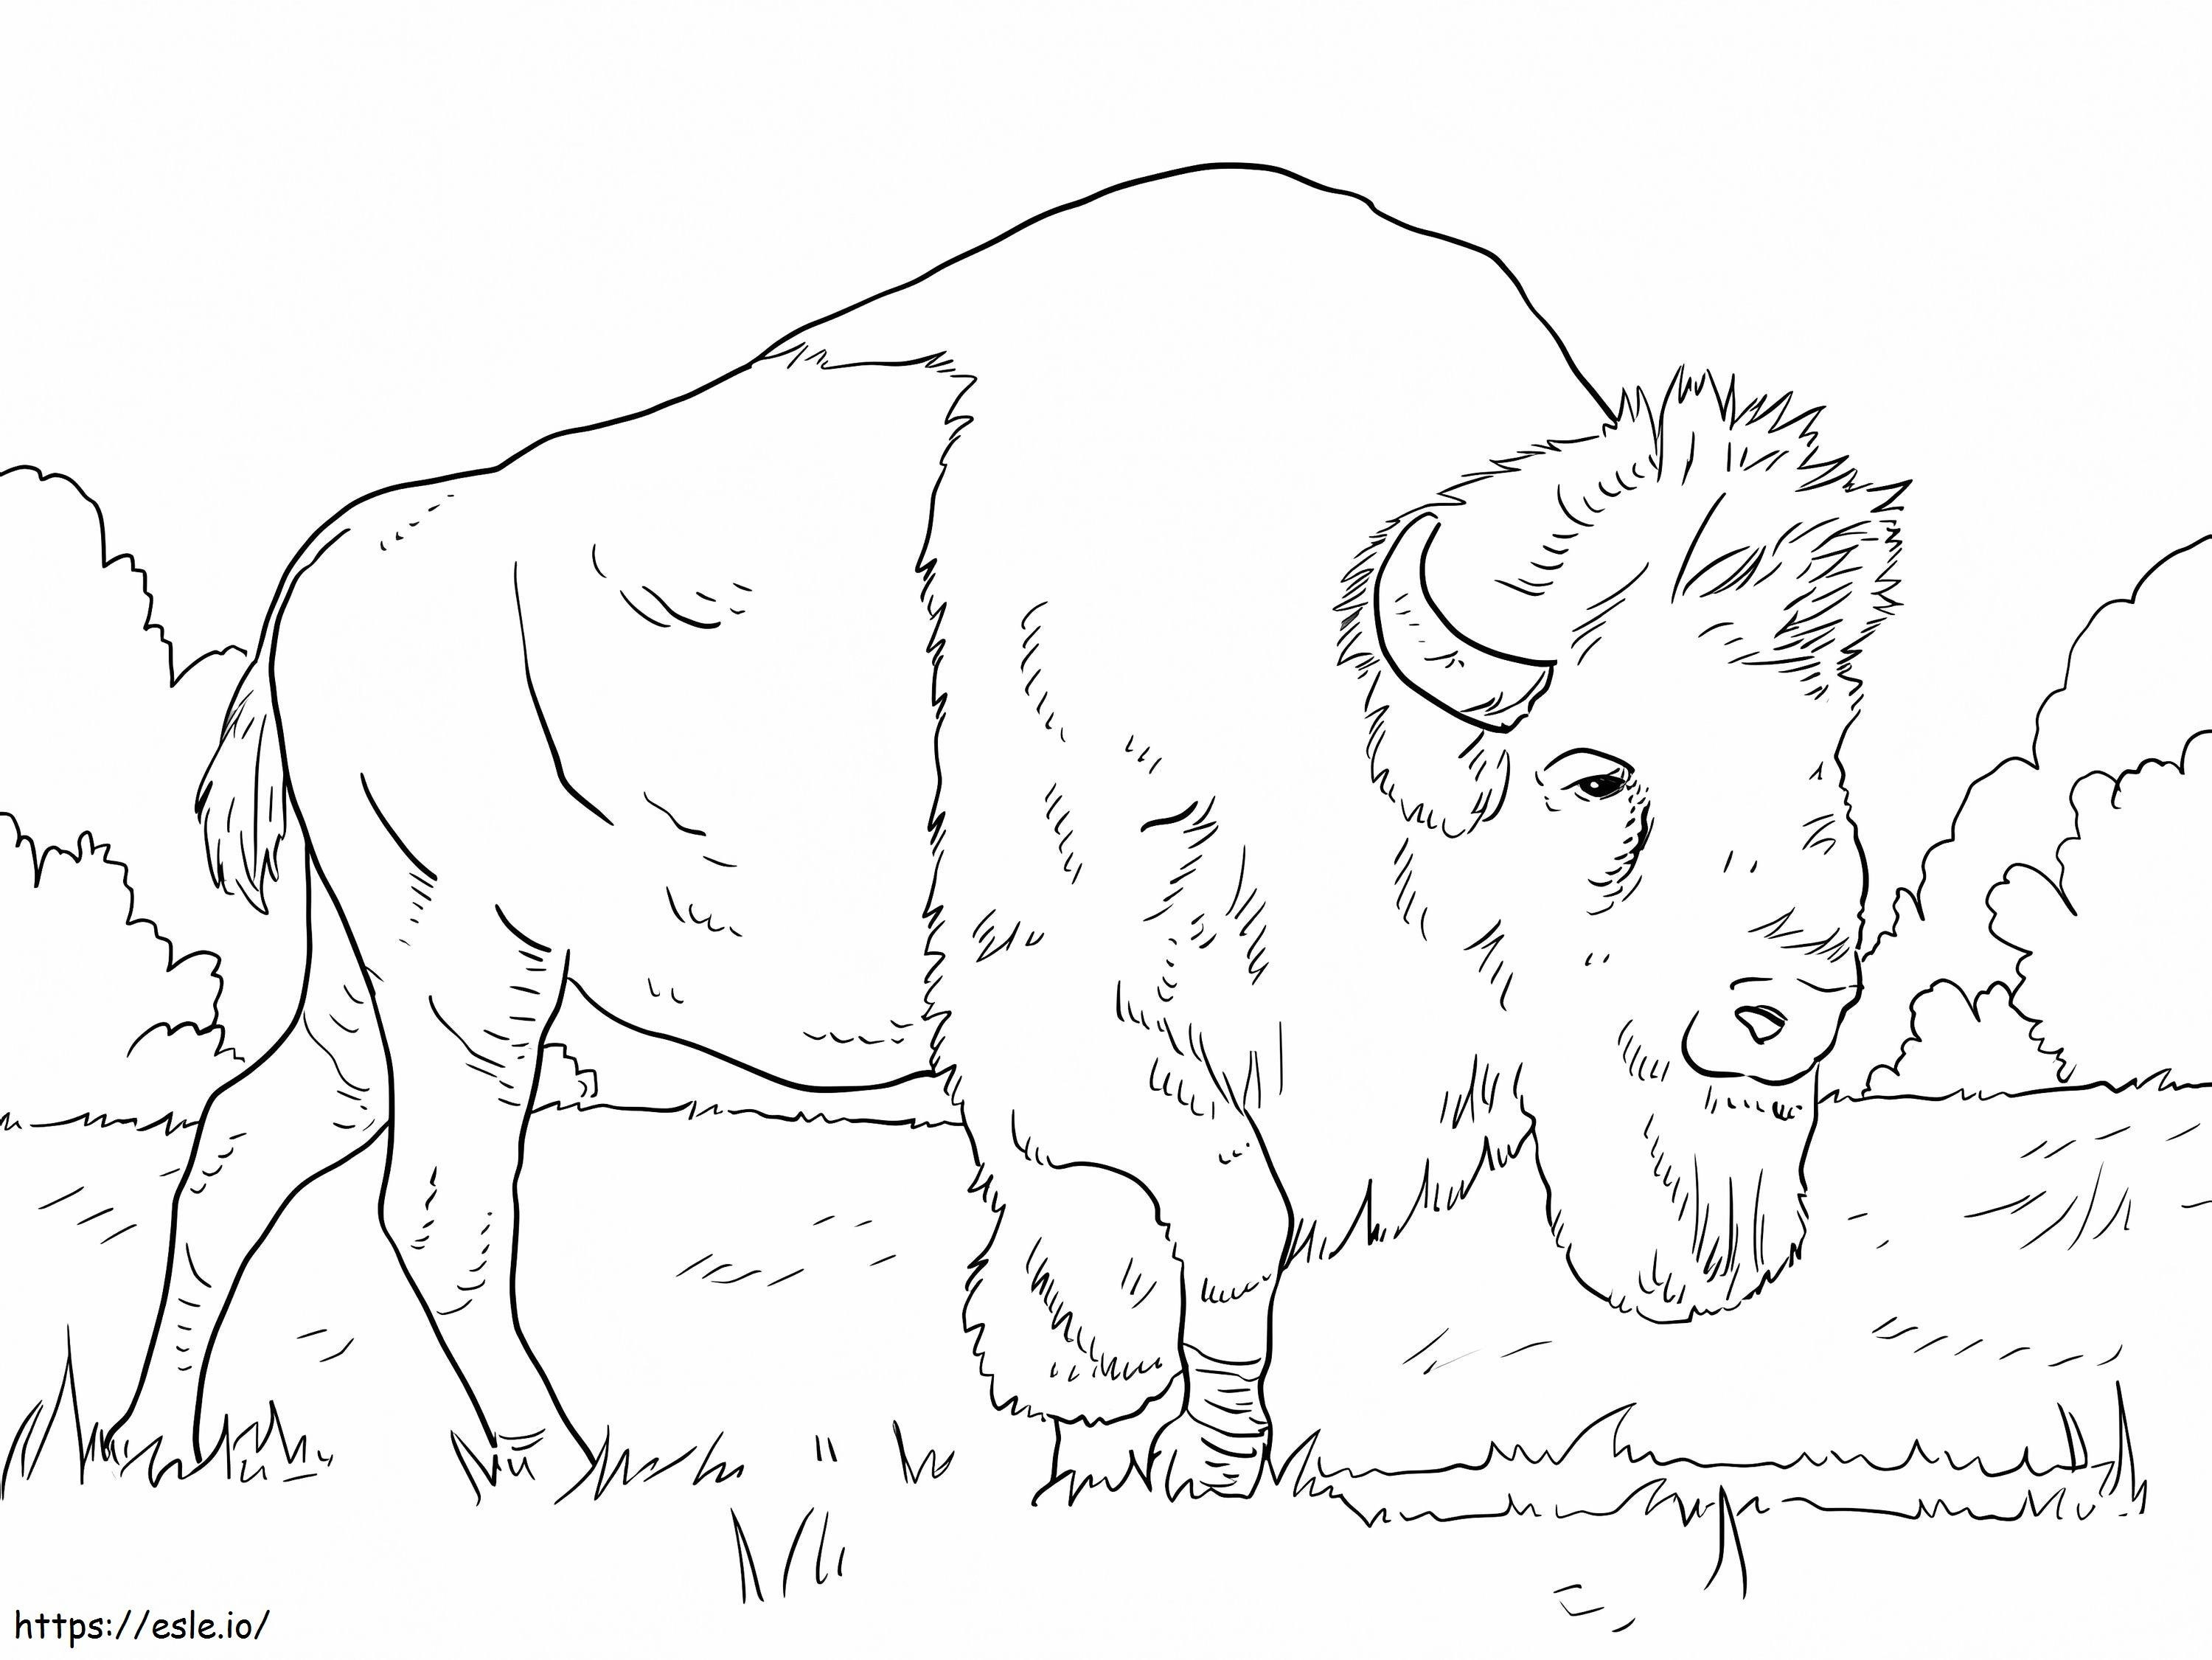 Bison Grazing On Grass coloring page